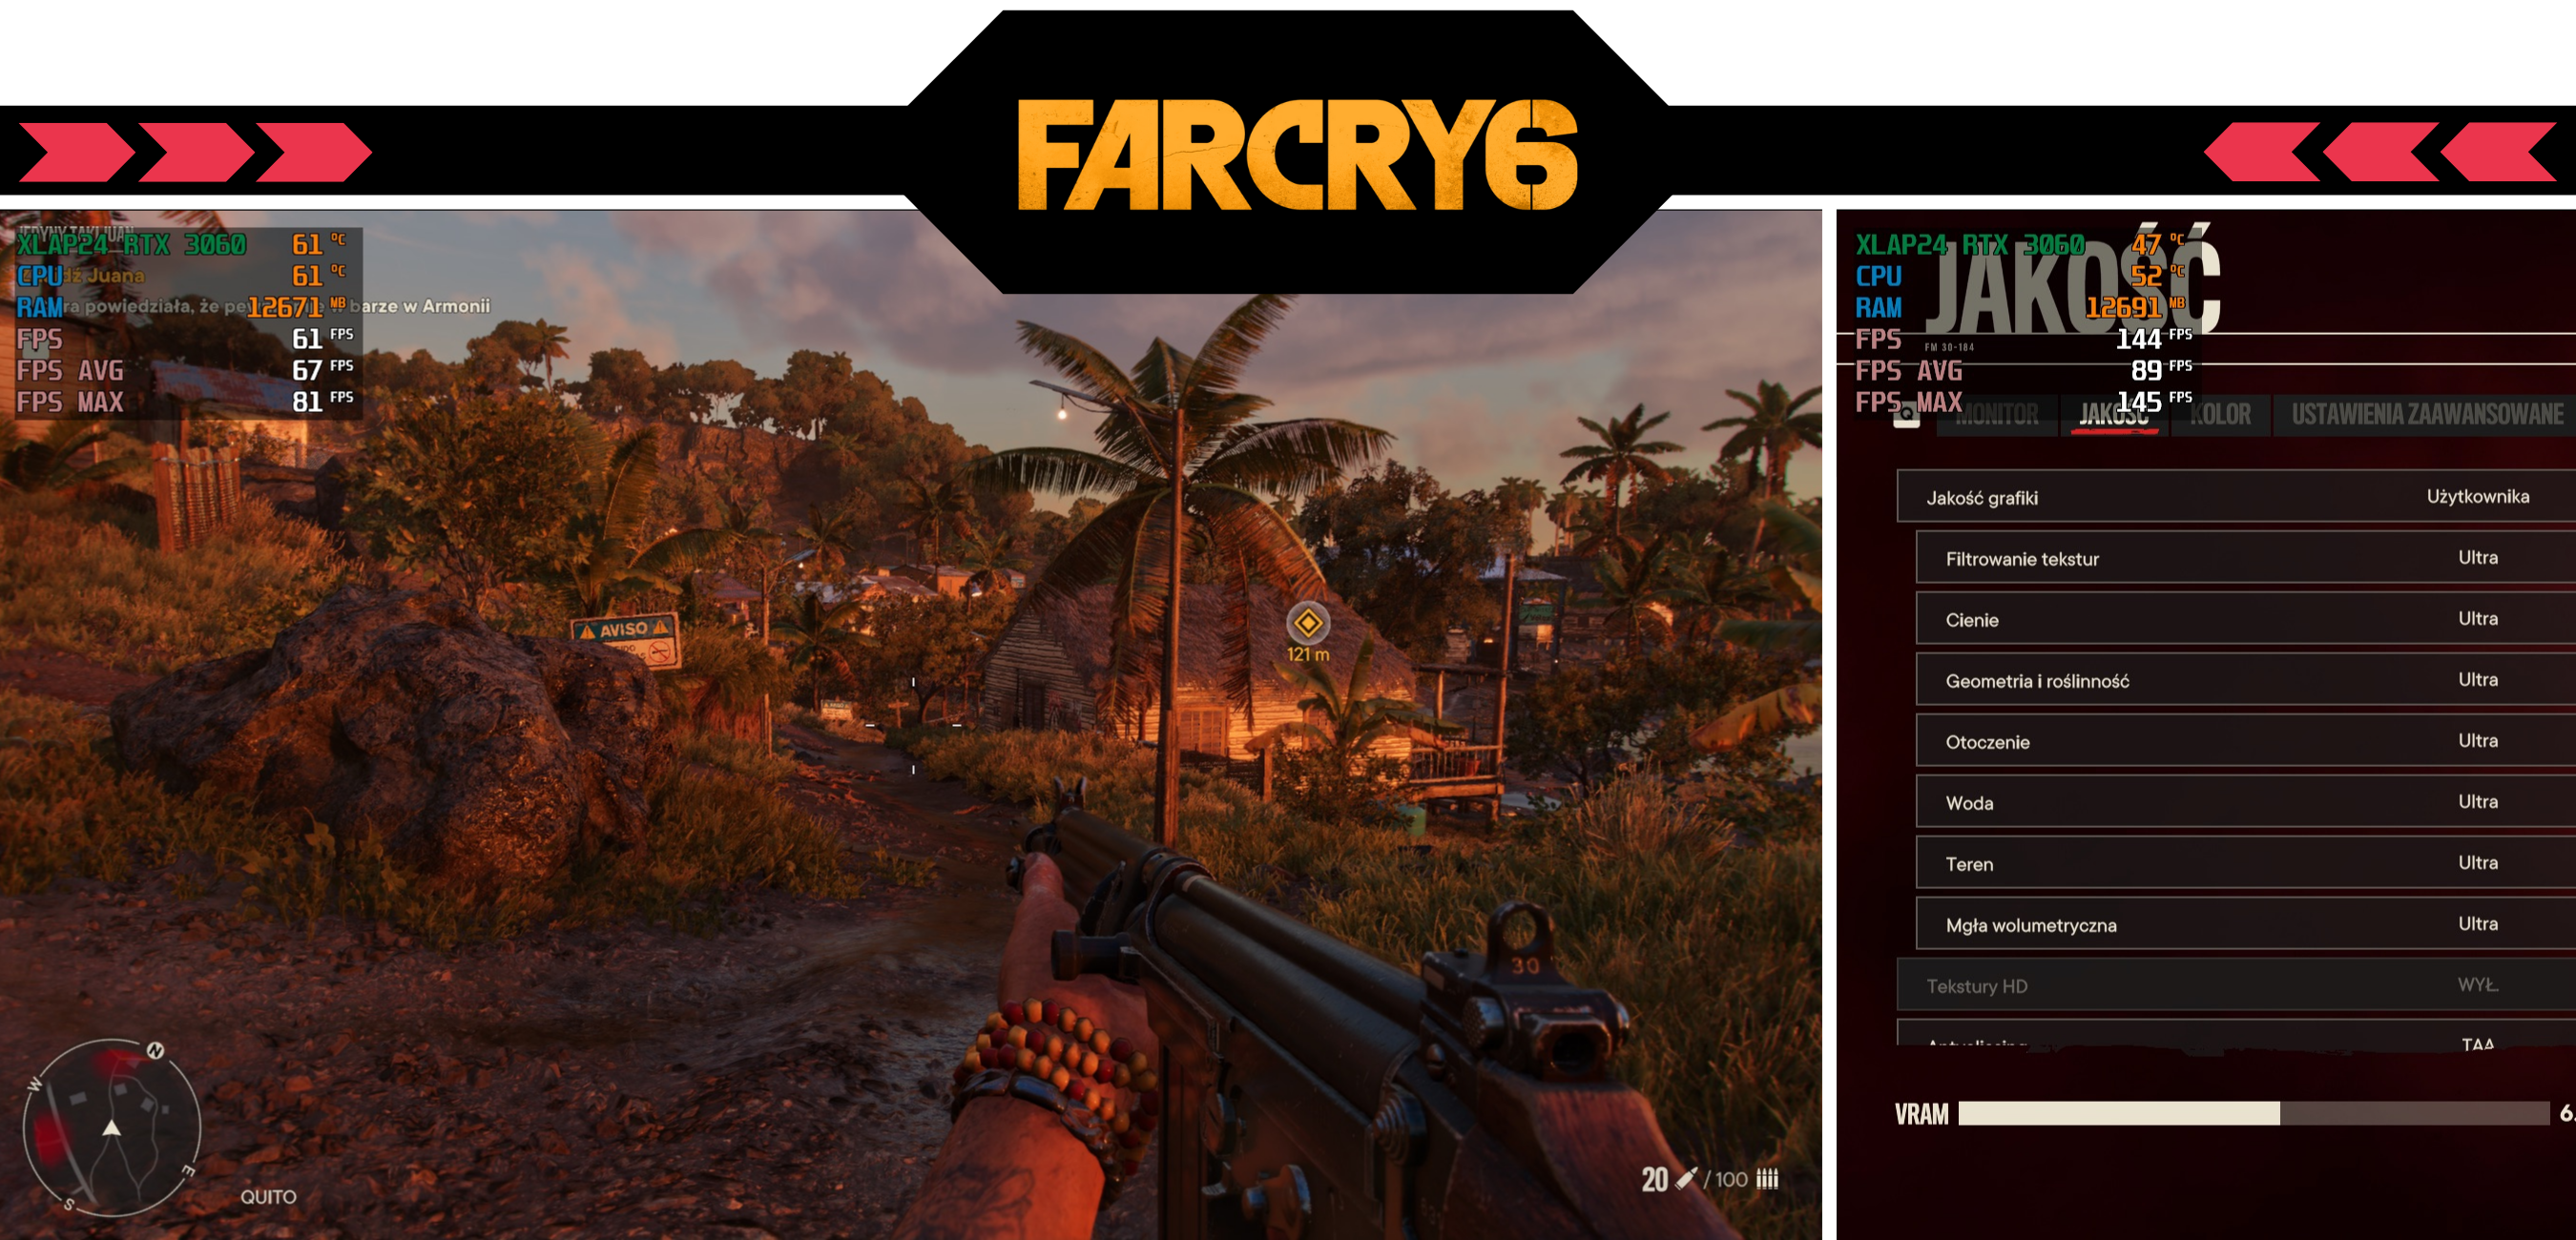 Farcry6_screen_3060.png